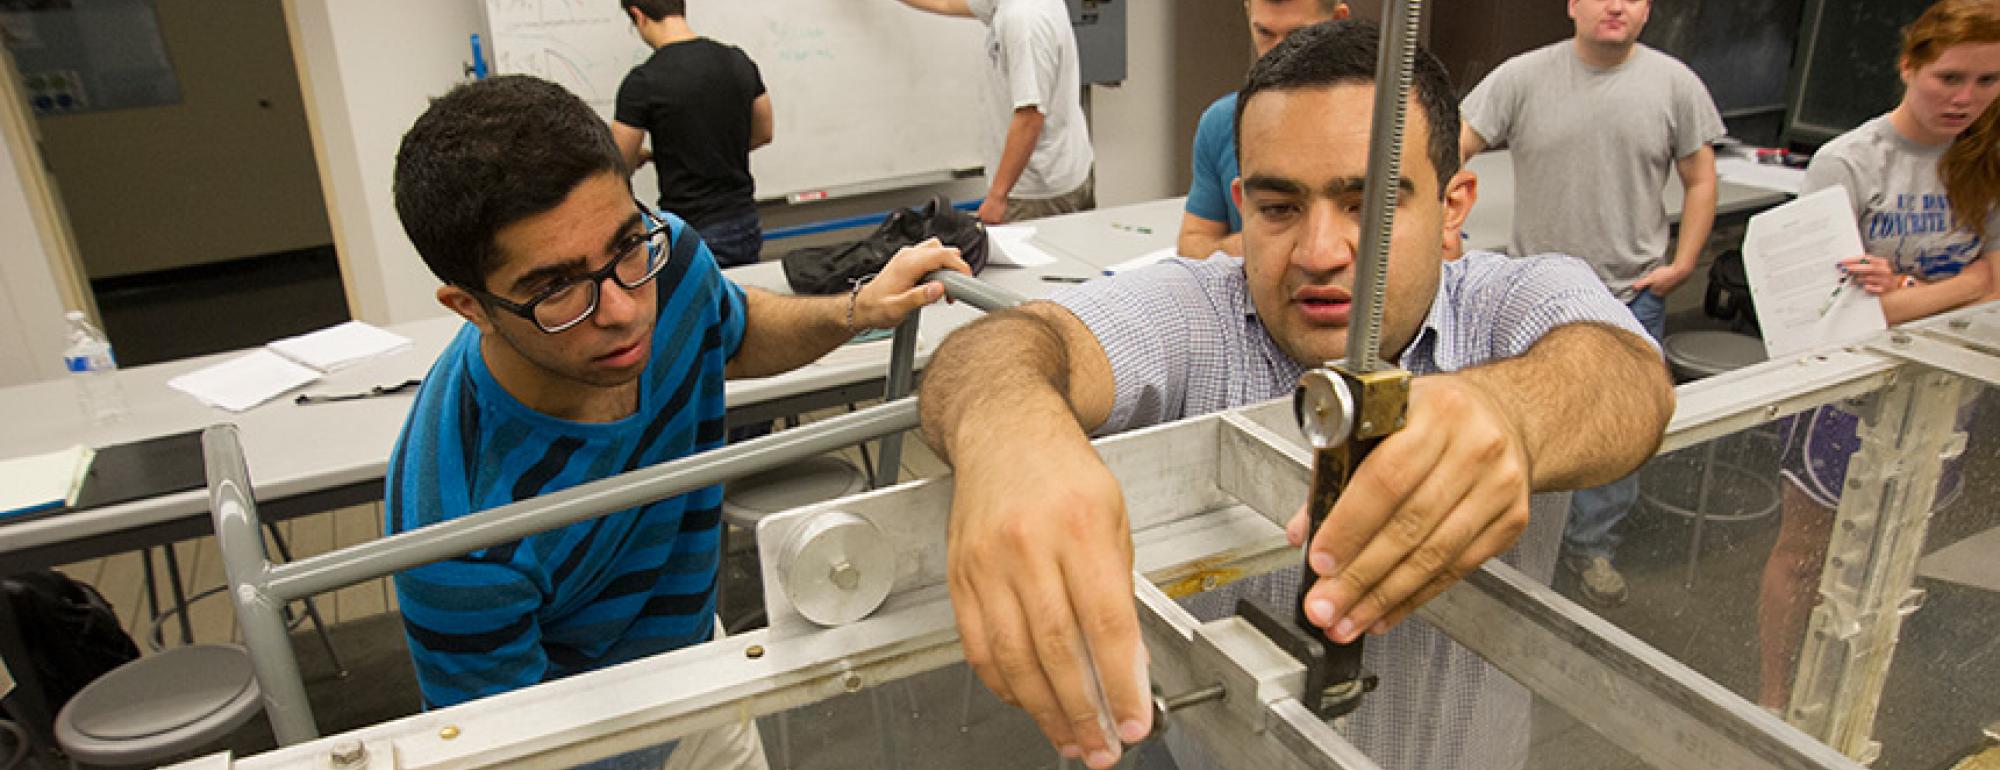 UC Davis civil and environmental engineering graduate student Kaveh Zamani, right, showing a student how to use an instrument